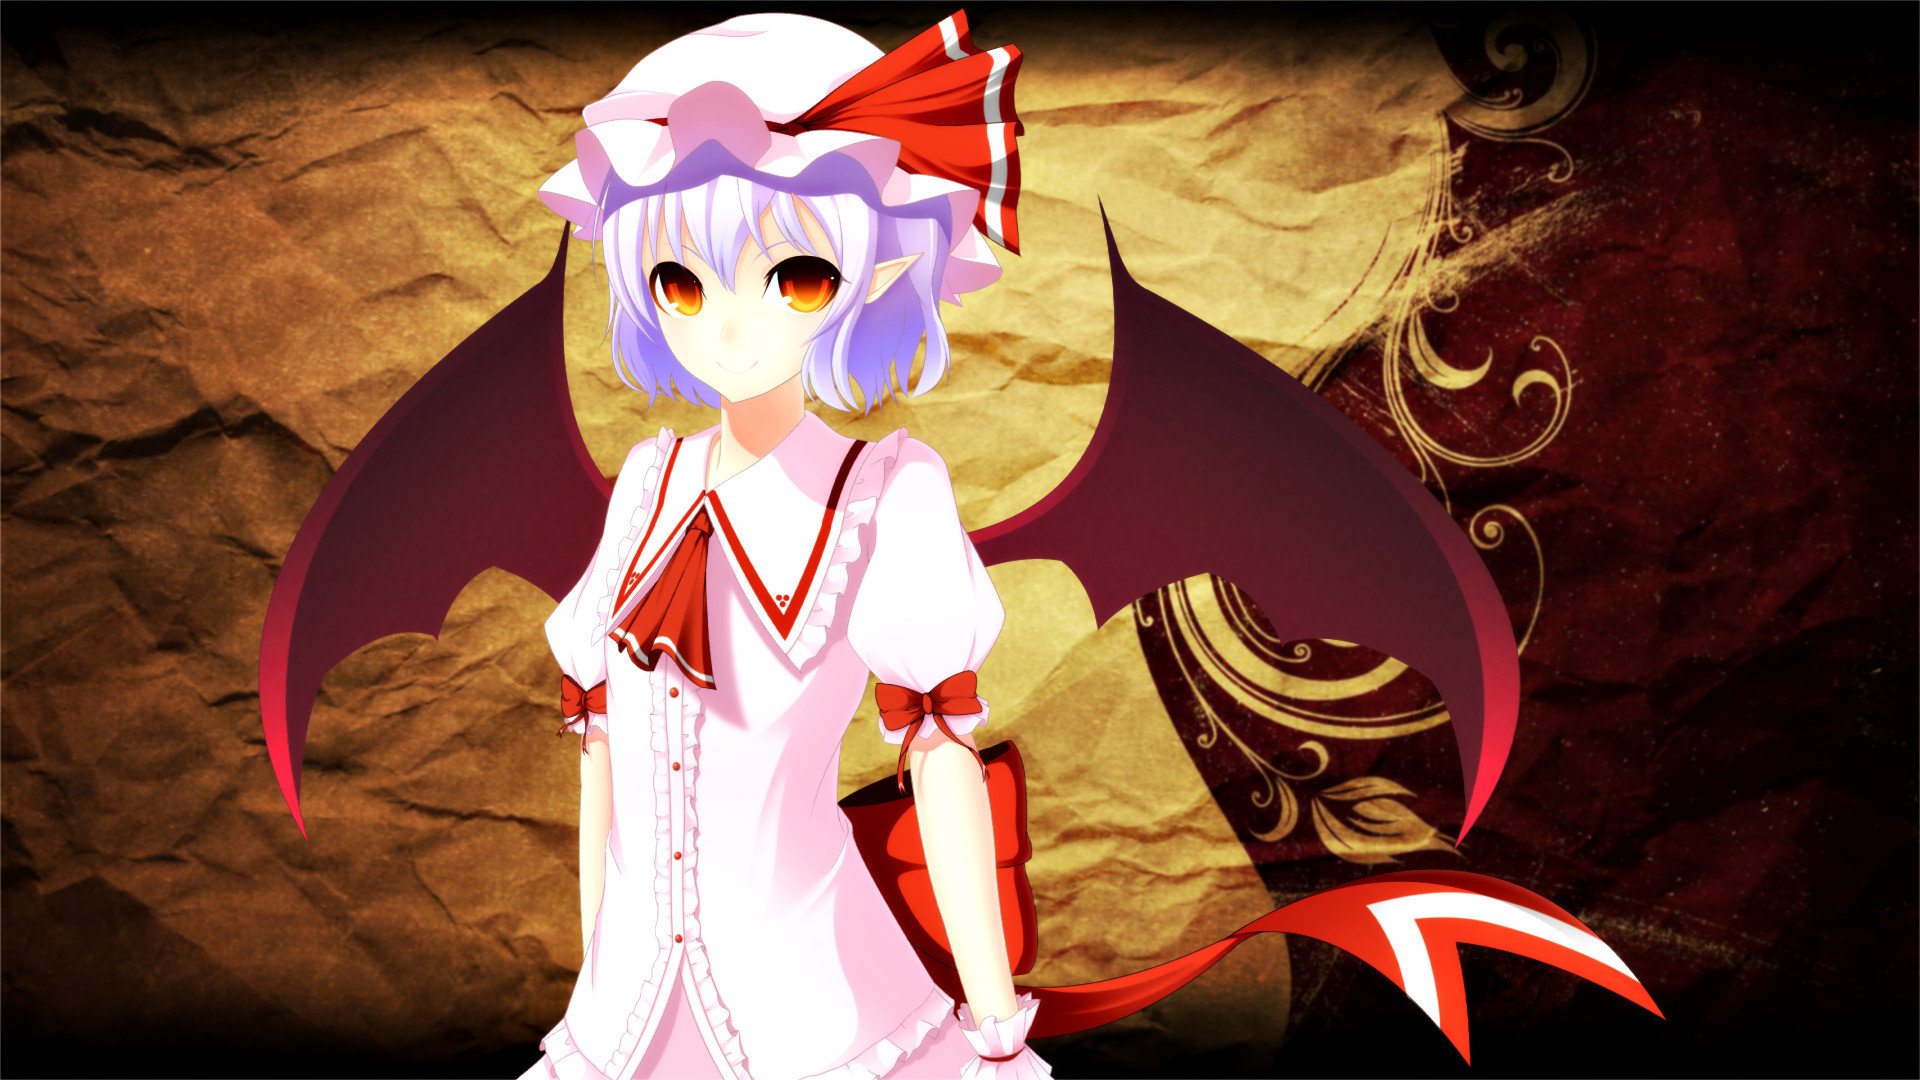 Download full hd 1920x1080 Remilia Scarlet PC background ID:223729 for free